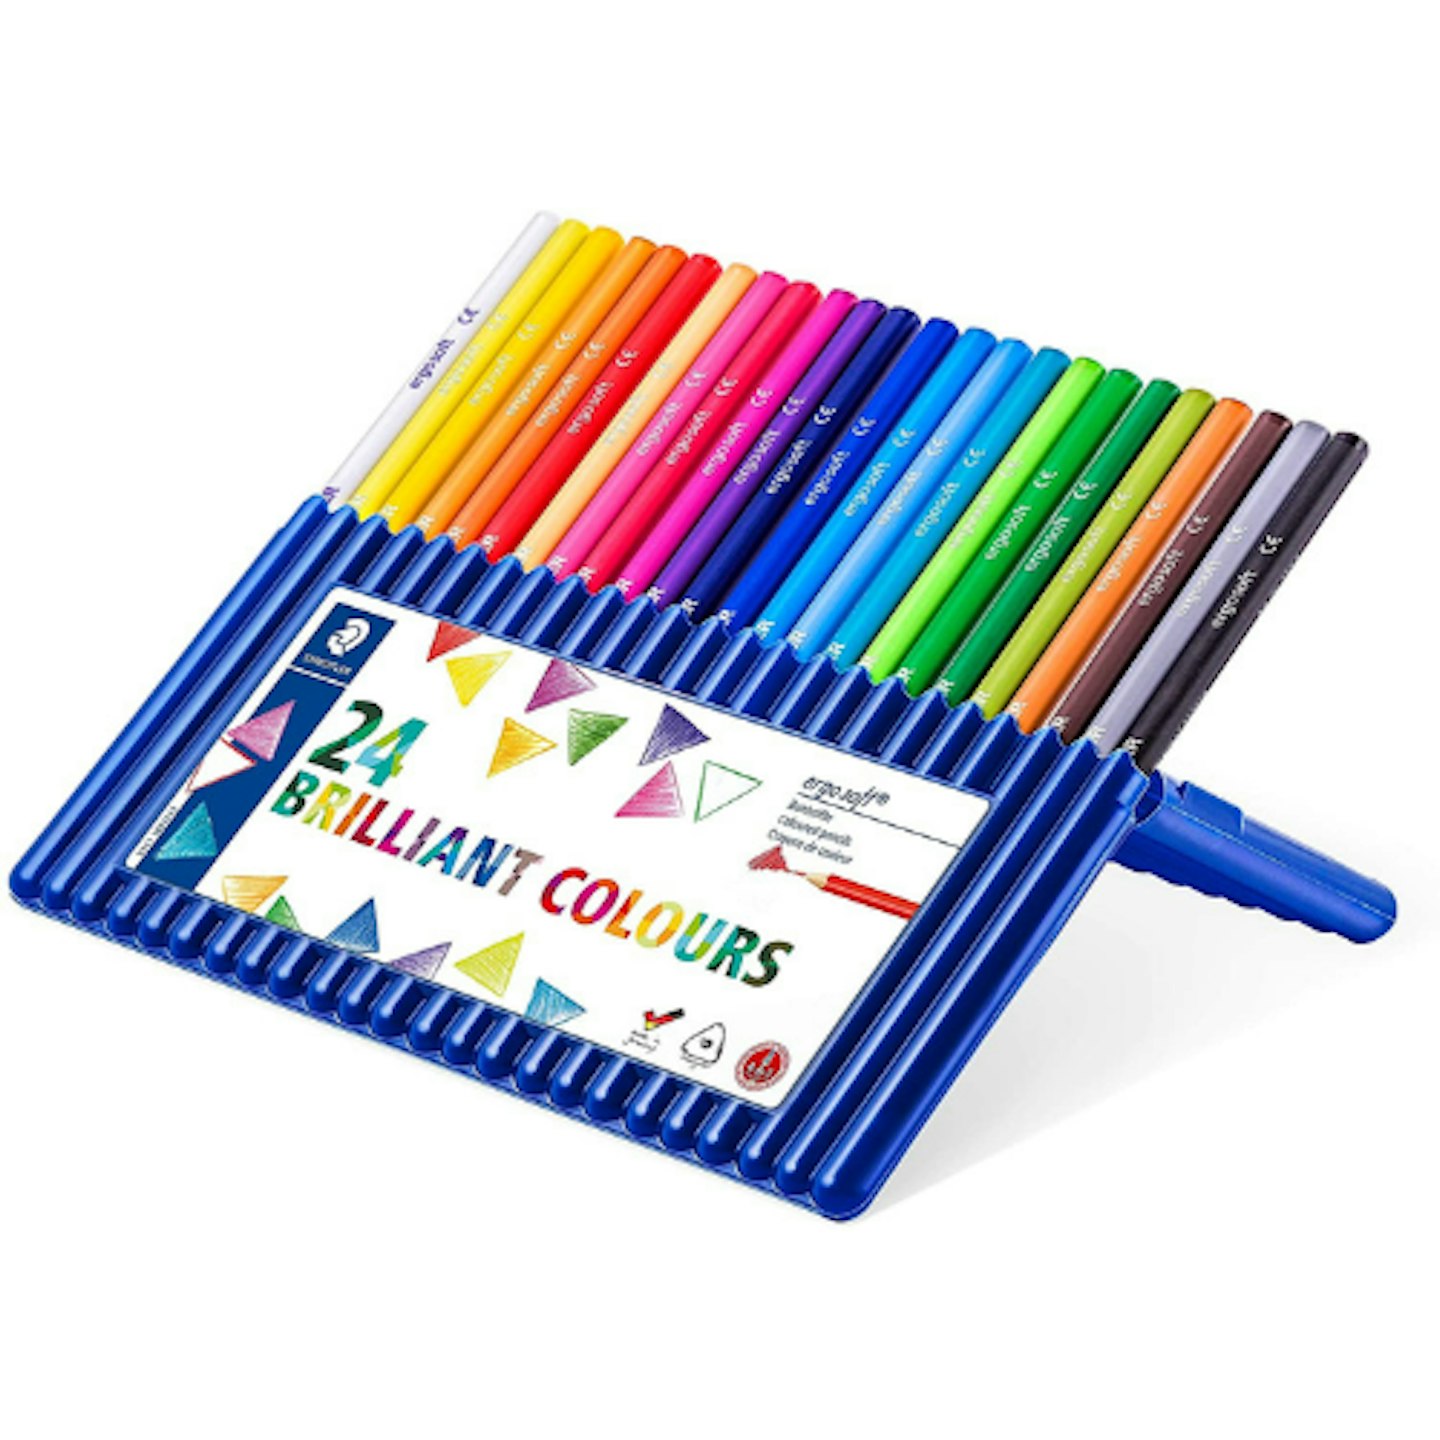 The Best Colour Pencils For Adults UK 2021